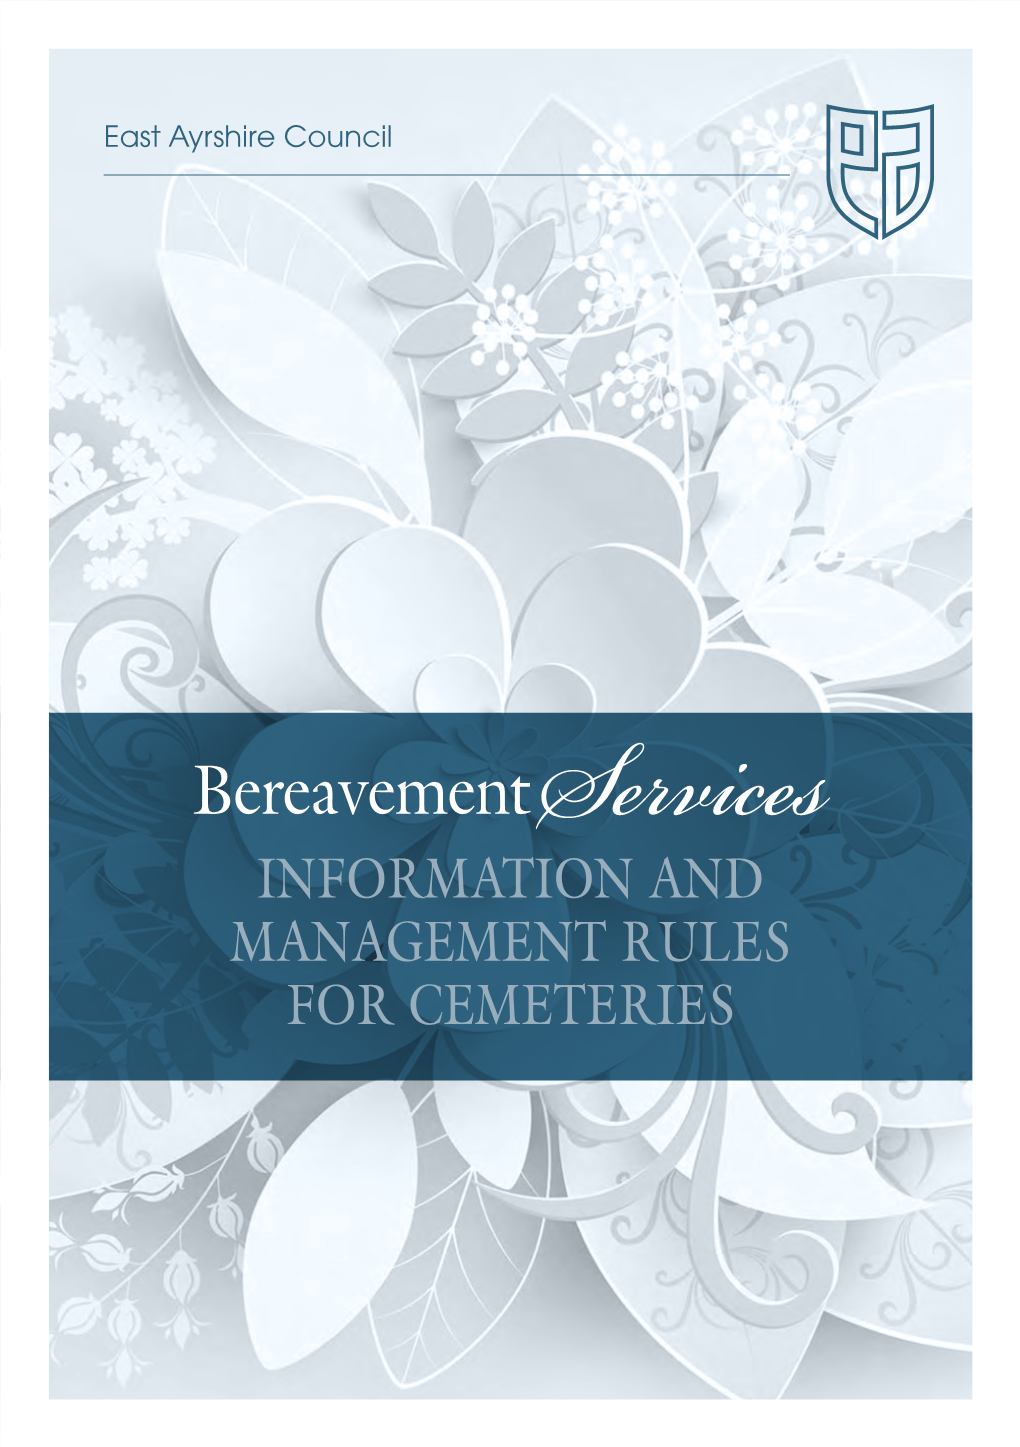 Cemetery Management Rules